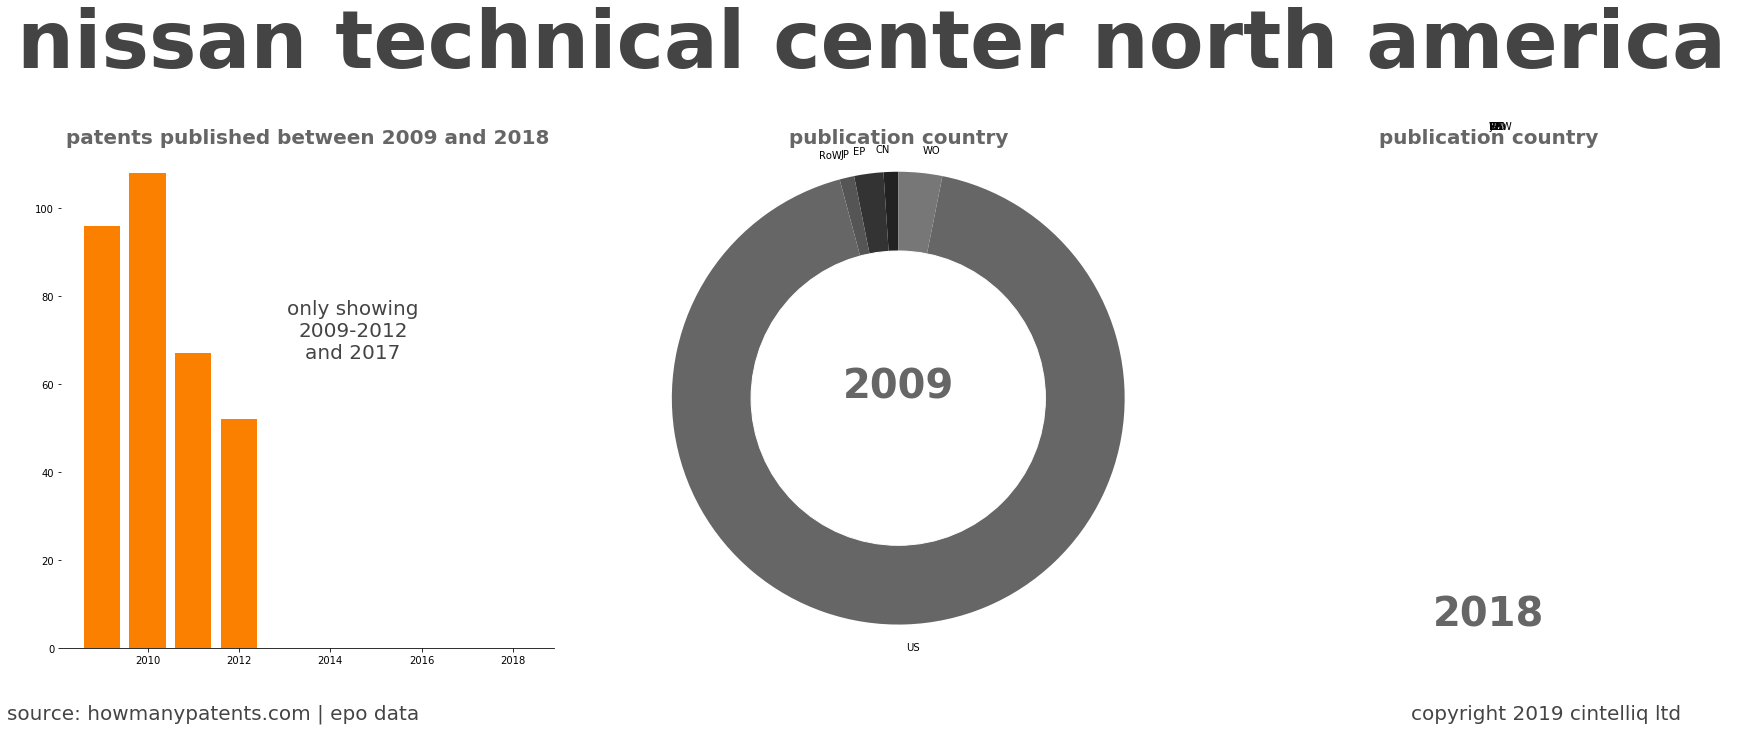 summary of patents for Nissan Technical Center North America